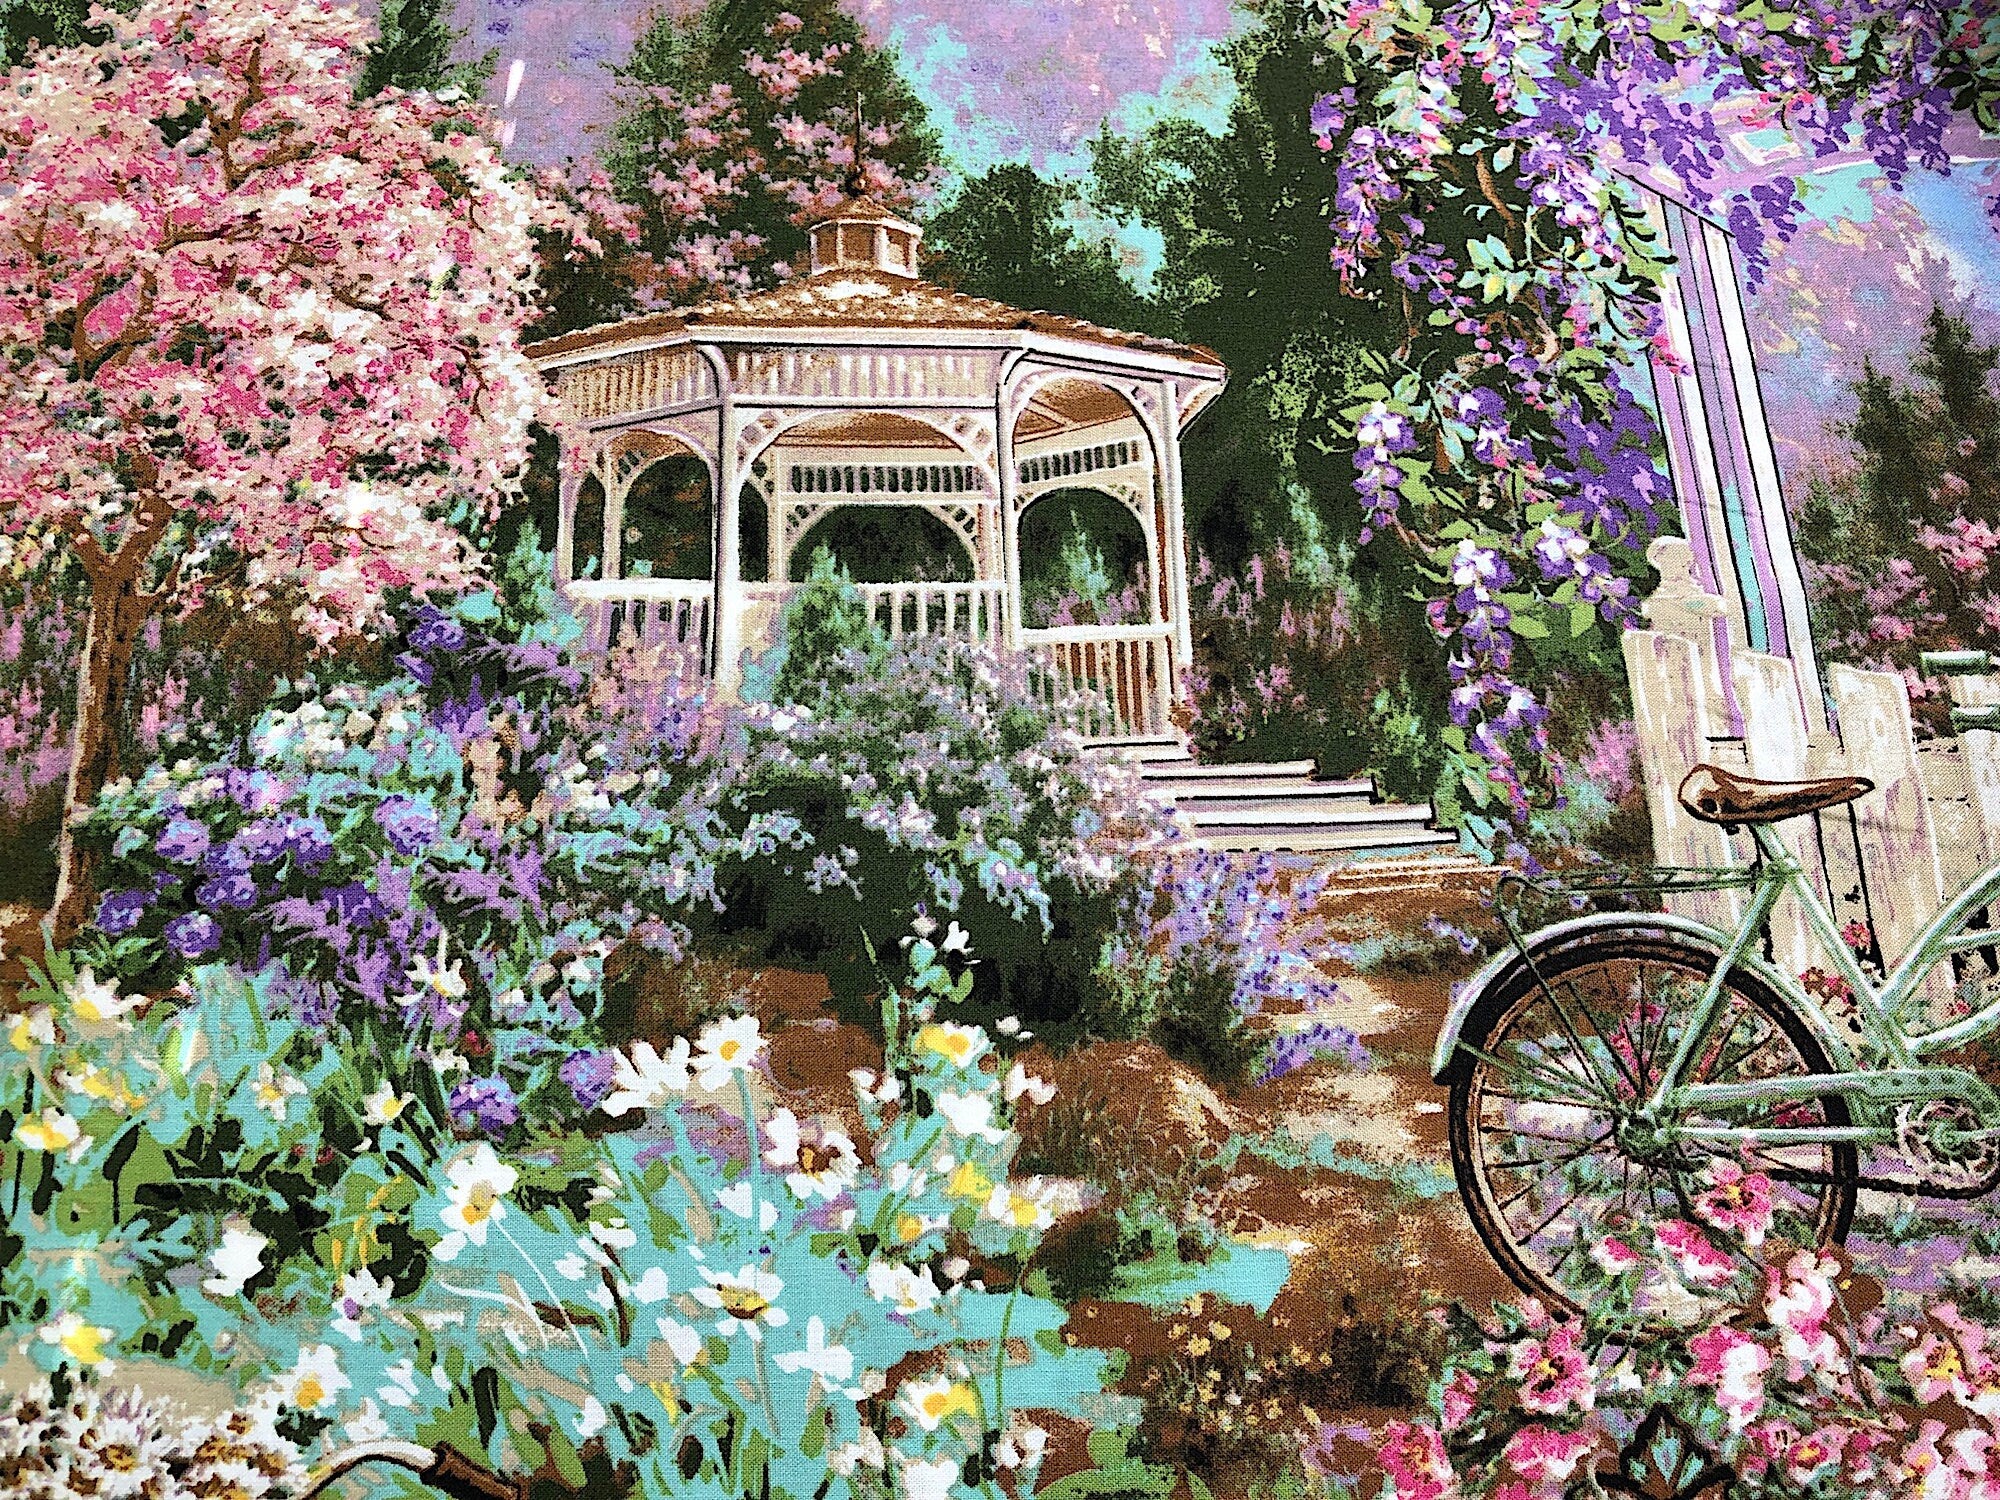 This fabric is called Flower Market Scenic and has a gazebo, bicycle and lots of flowers and trees.